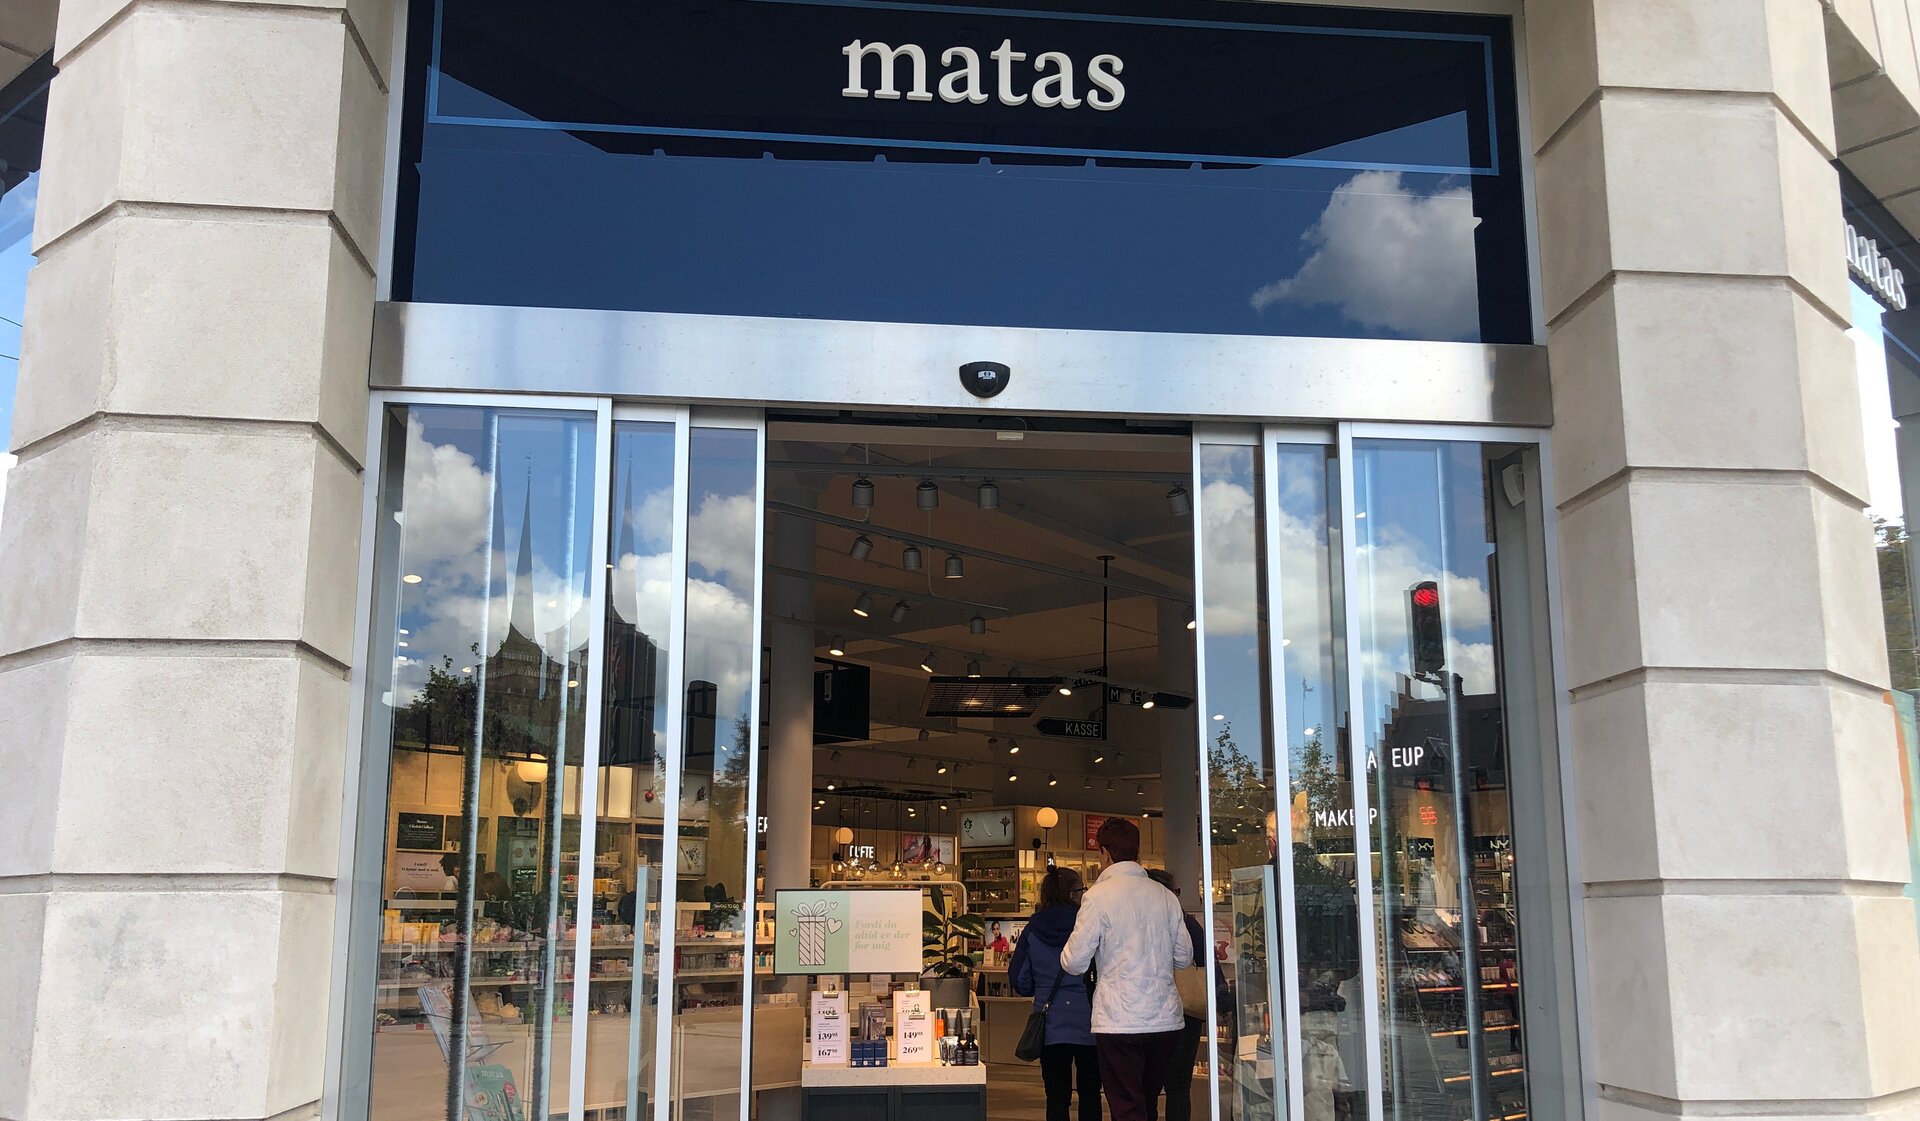 Matas´ omnichannel strategy provides a holistic experience across platforms